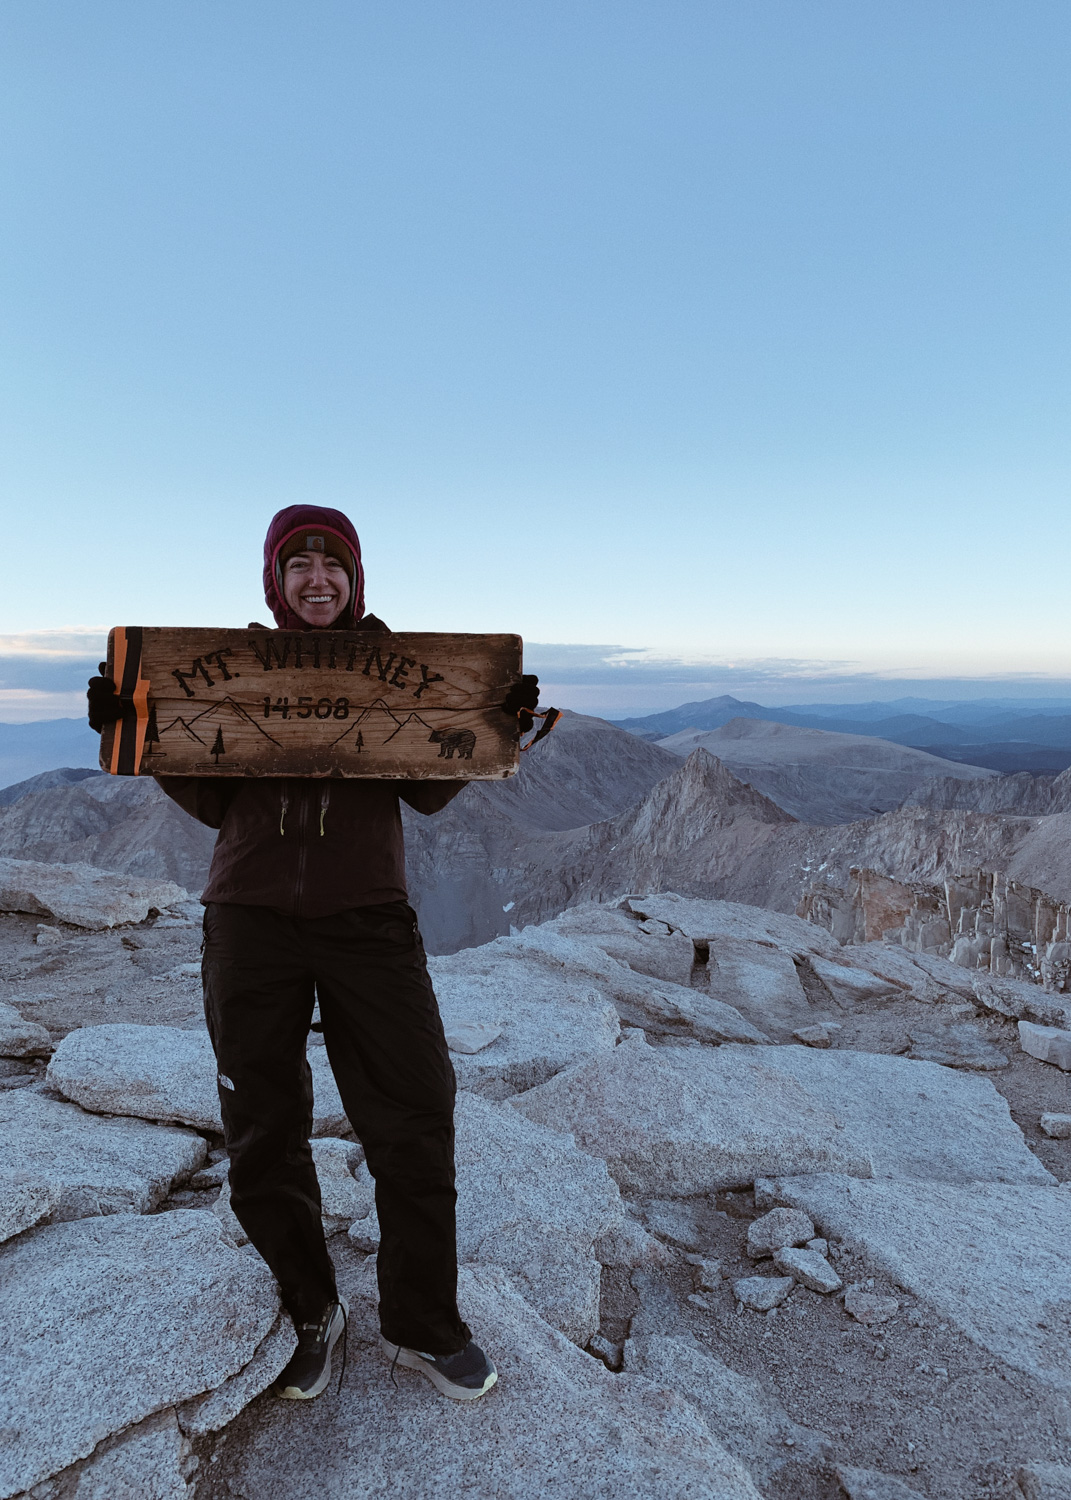 A female hiker smiles atop Mt Whitney (Tumanguya) with a wooden sign just before sunrise